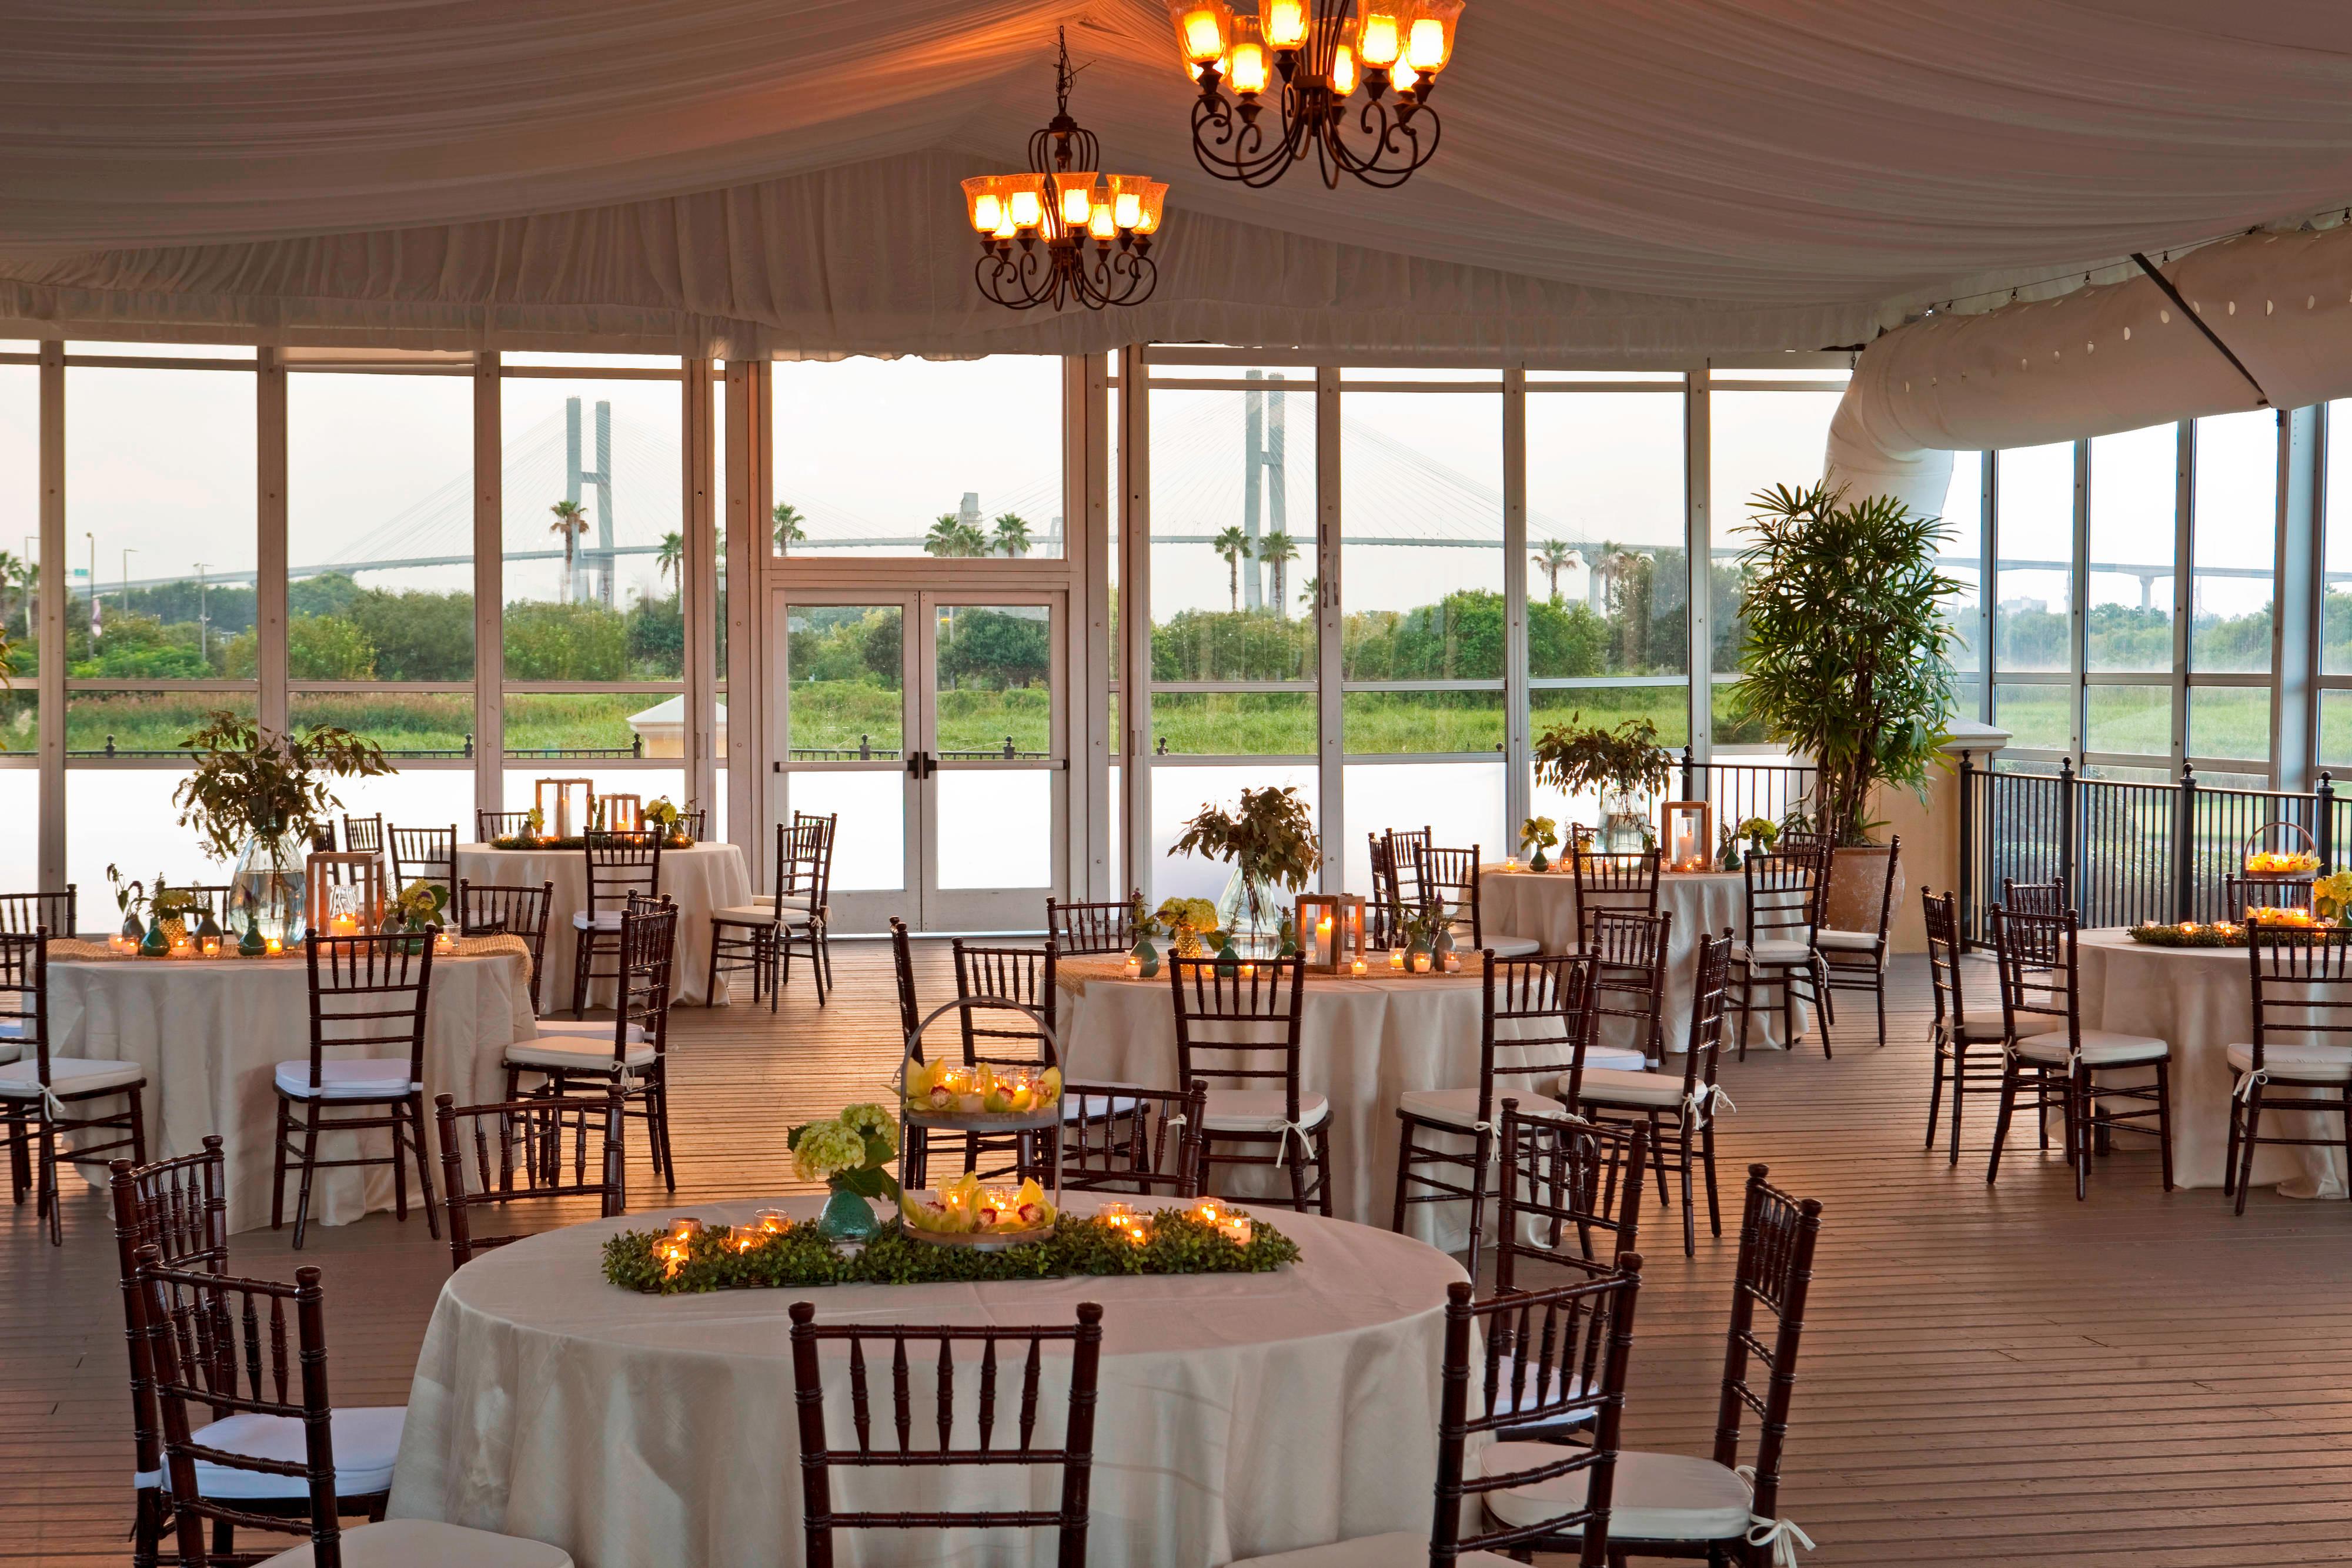 Glass-walled Club Pavilion set for wedding reception with round tables, flowers and candles